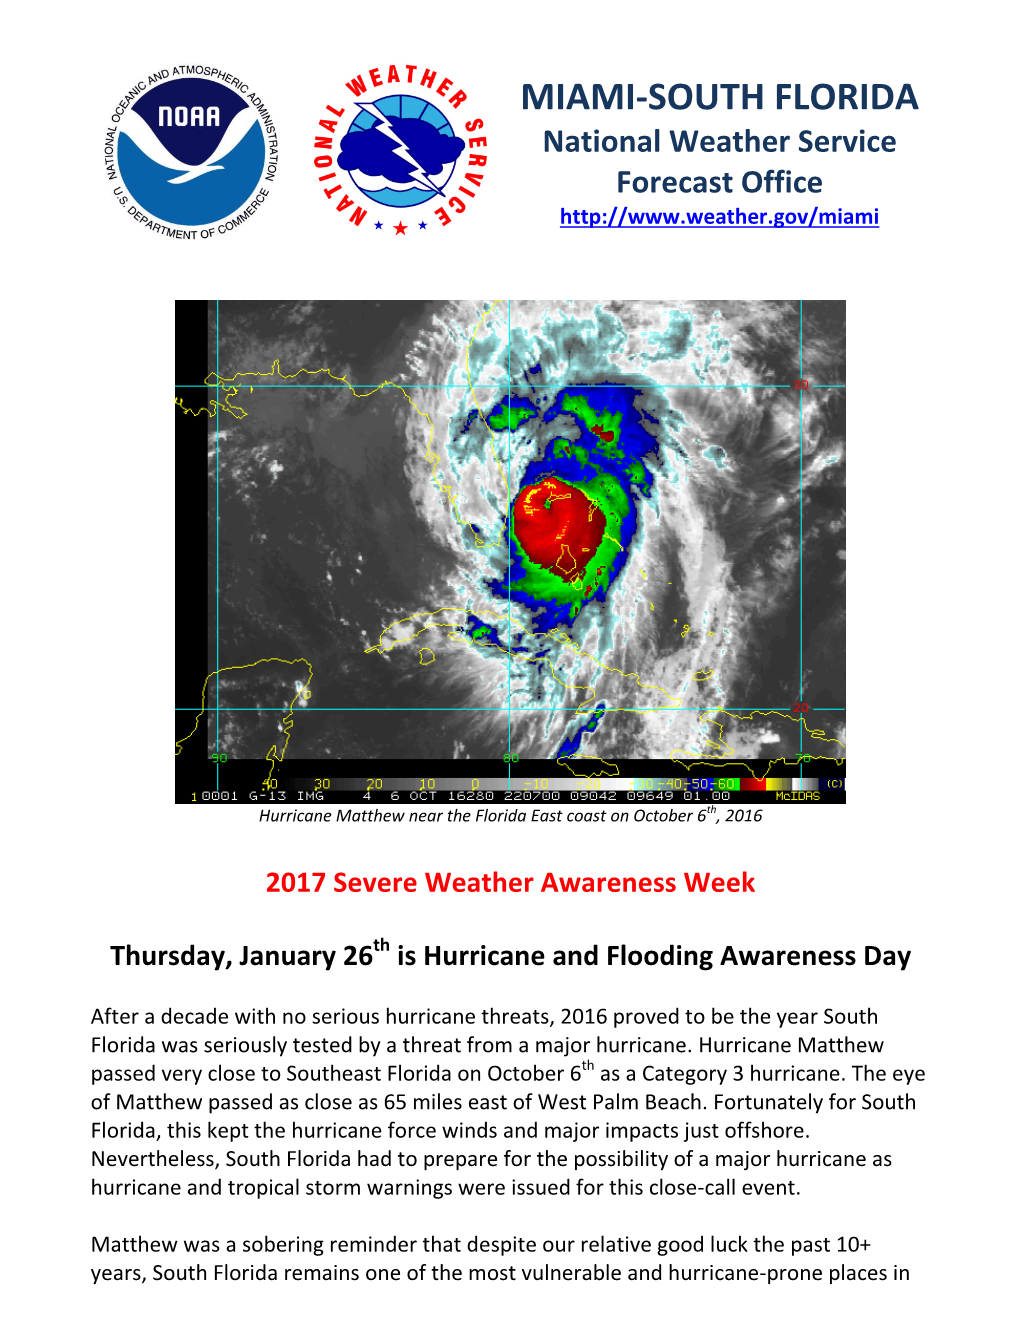 MIAMI-SOUTH FLORIDA National Weather Service Forecast Office